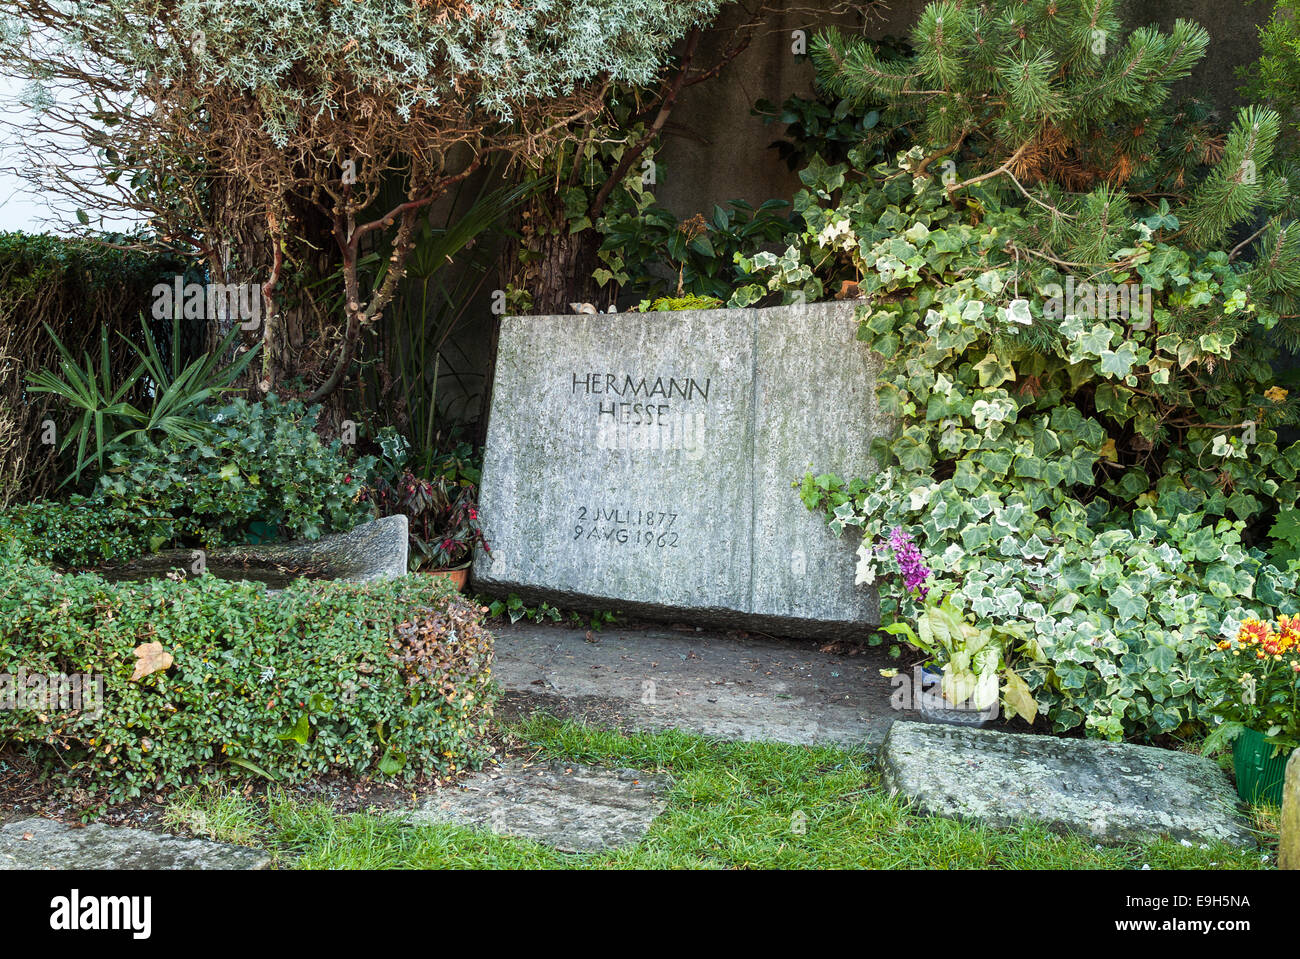 Tombe d'Hermann Hesse, 1877 - 1962, Locarno, Collina d'Oro, Canton du Tessin, Suisse Banque D'Images